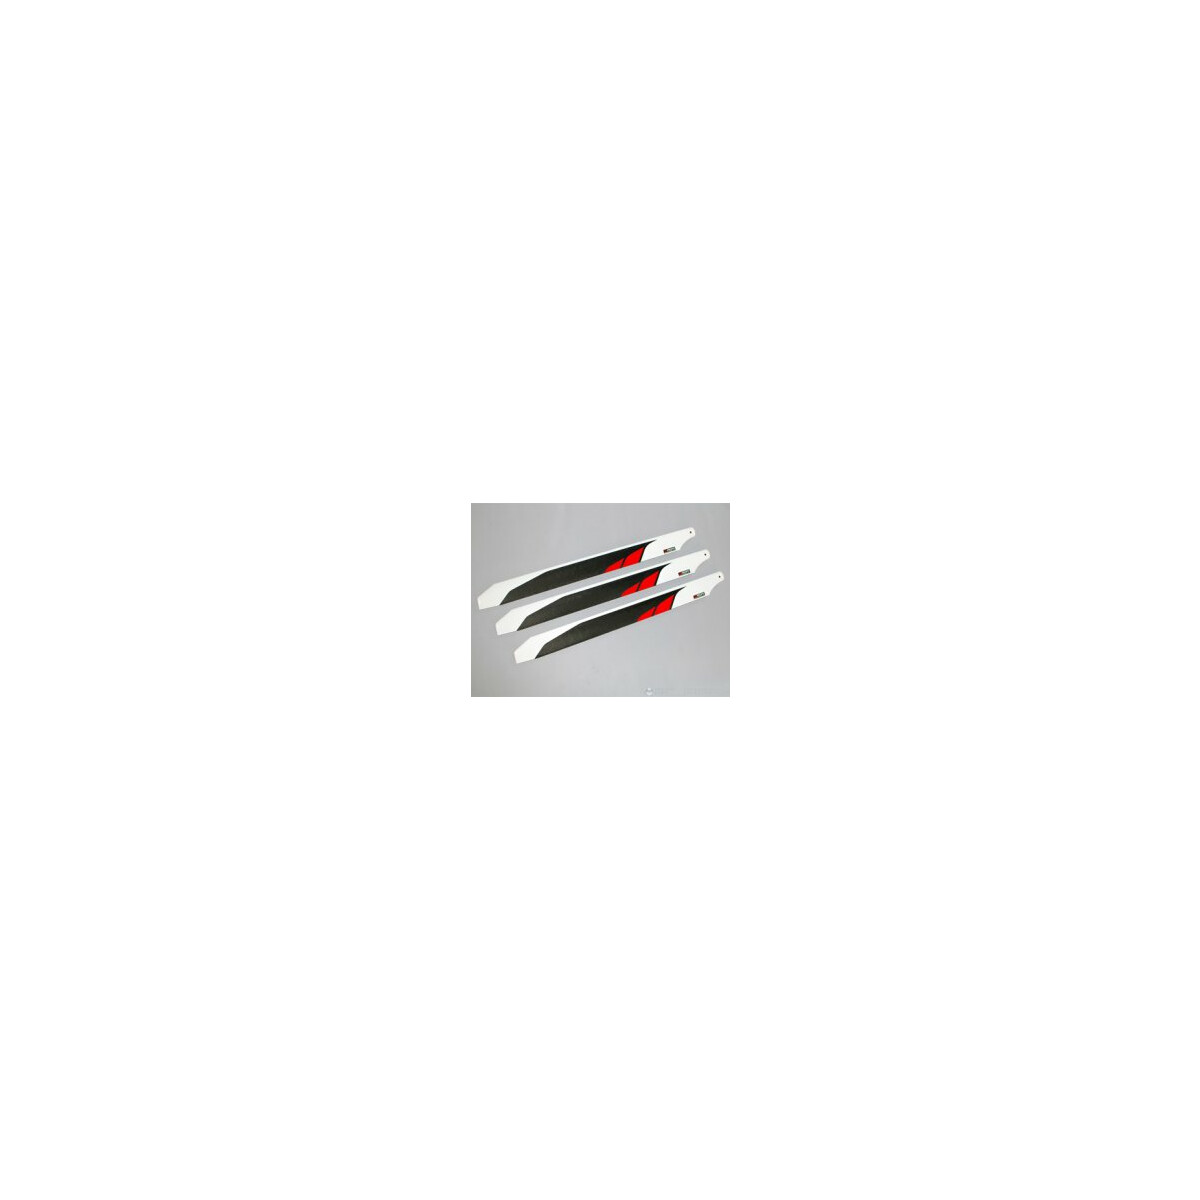 Carbon Main Rotor Blades for MB-391 765mm